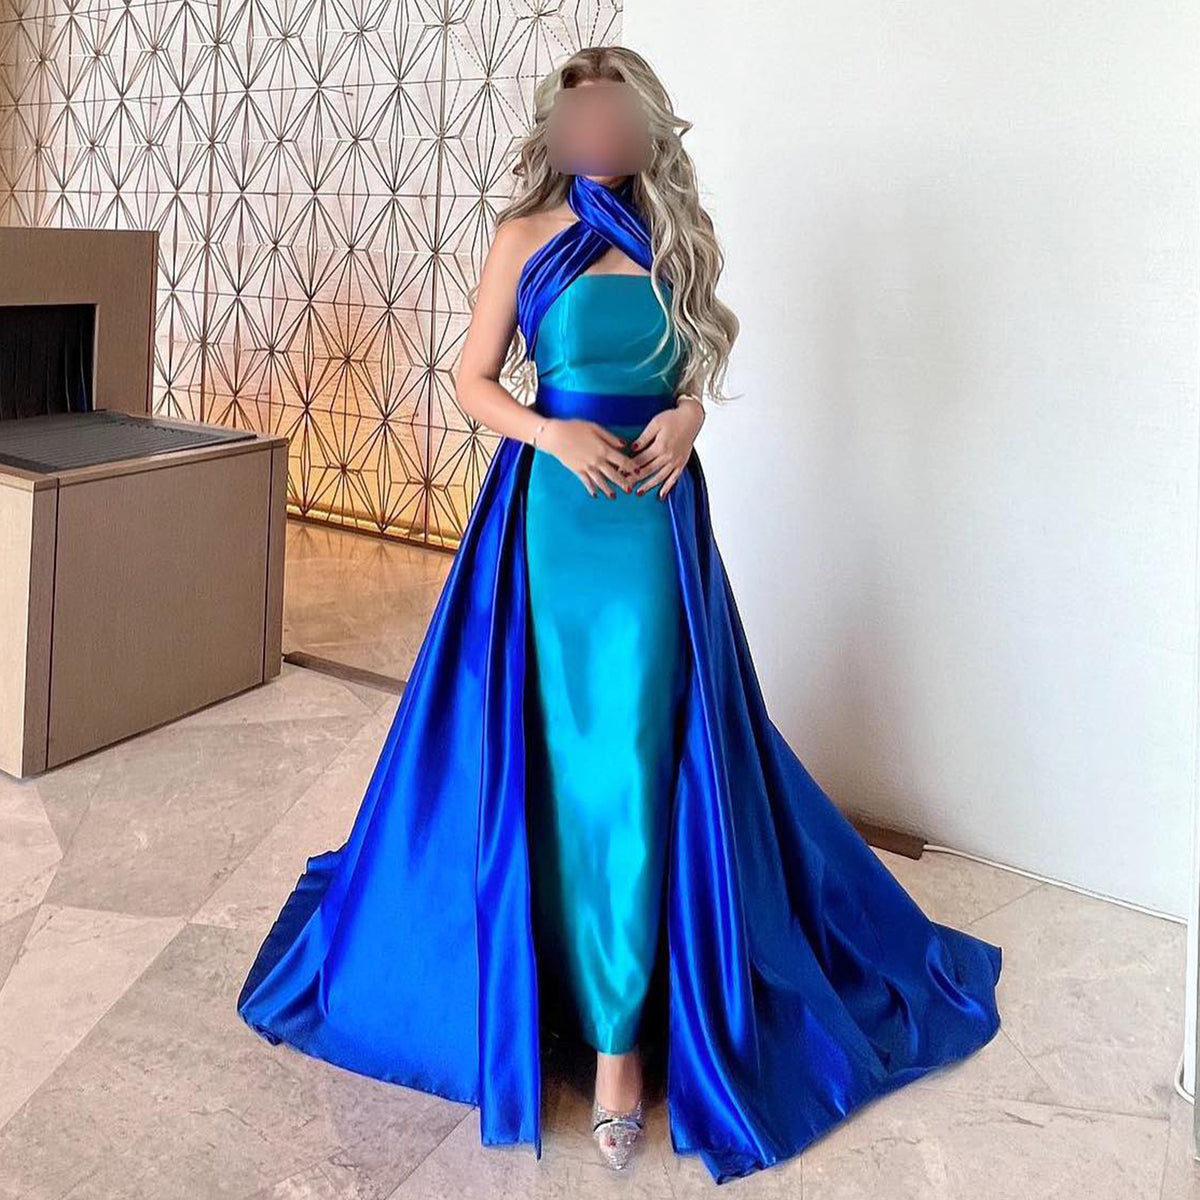 Sharon Said Arabic Royal Blue Contrast Turquoise Evening Dress with Overskirt Criss Cross Halter Women Wedding Party Dress SF012